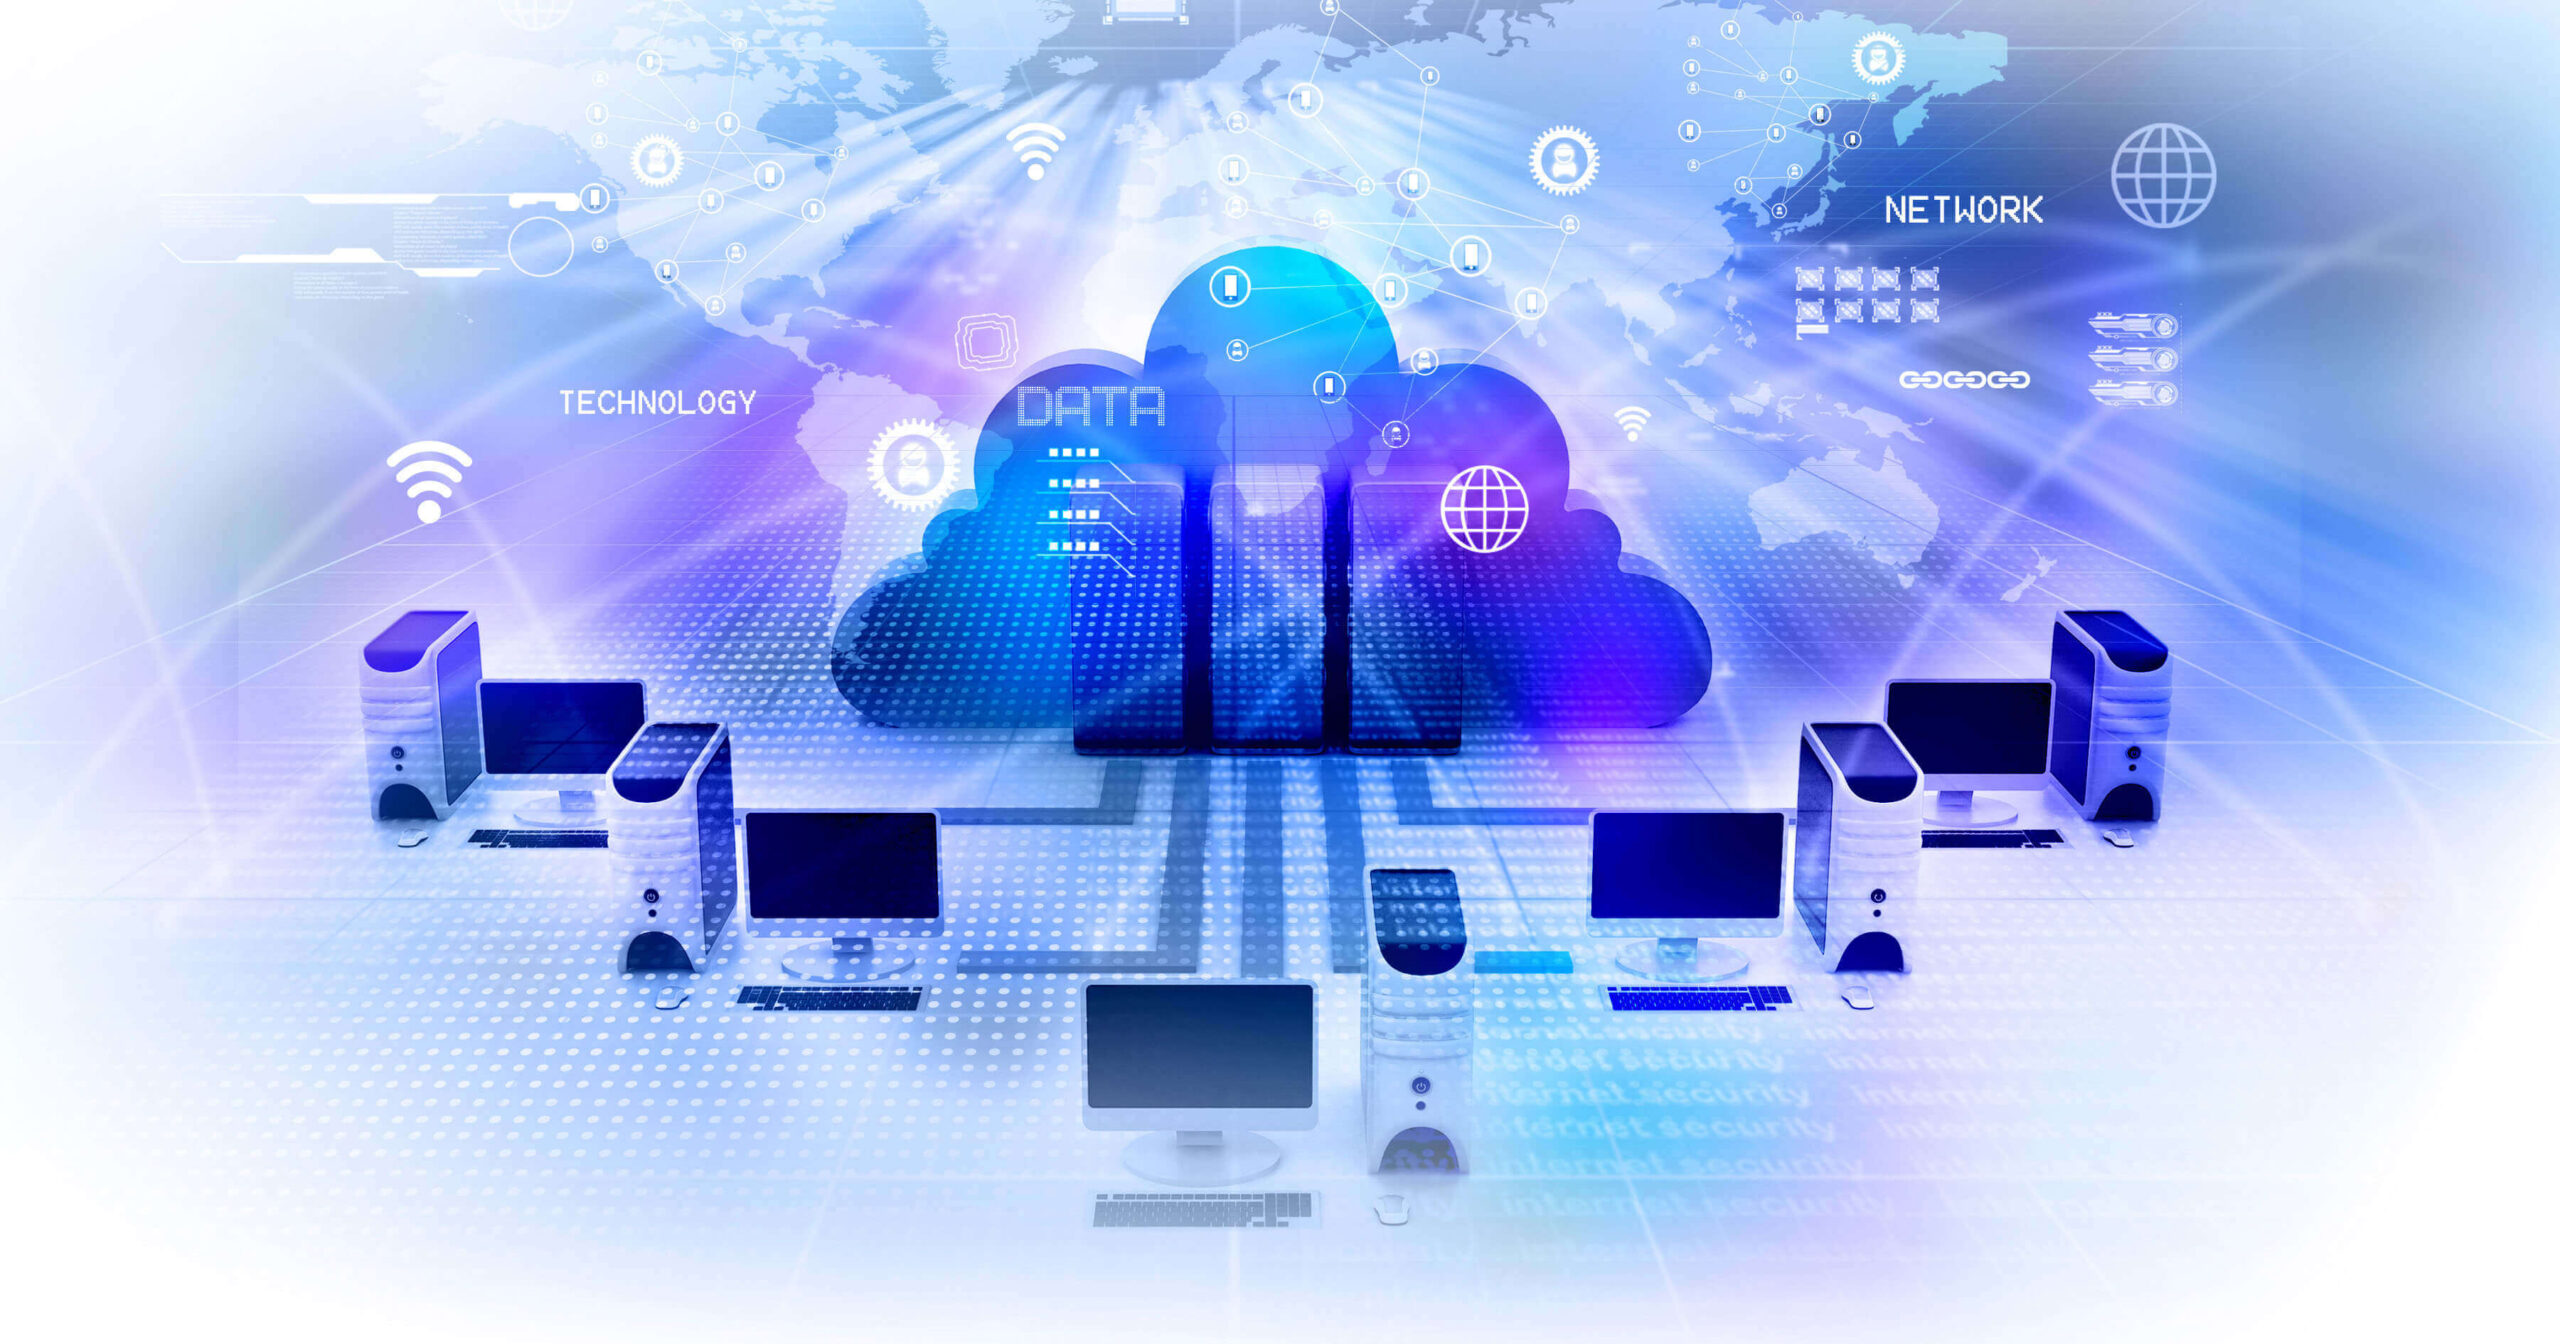 Major benefits of using some cloud service